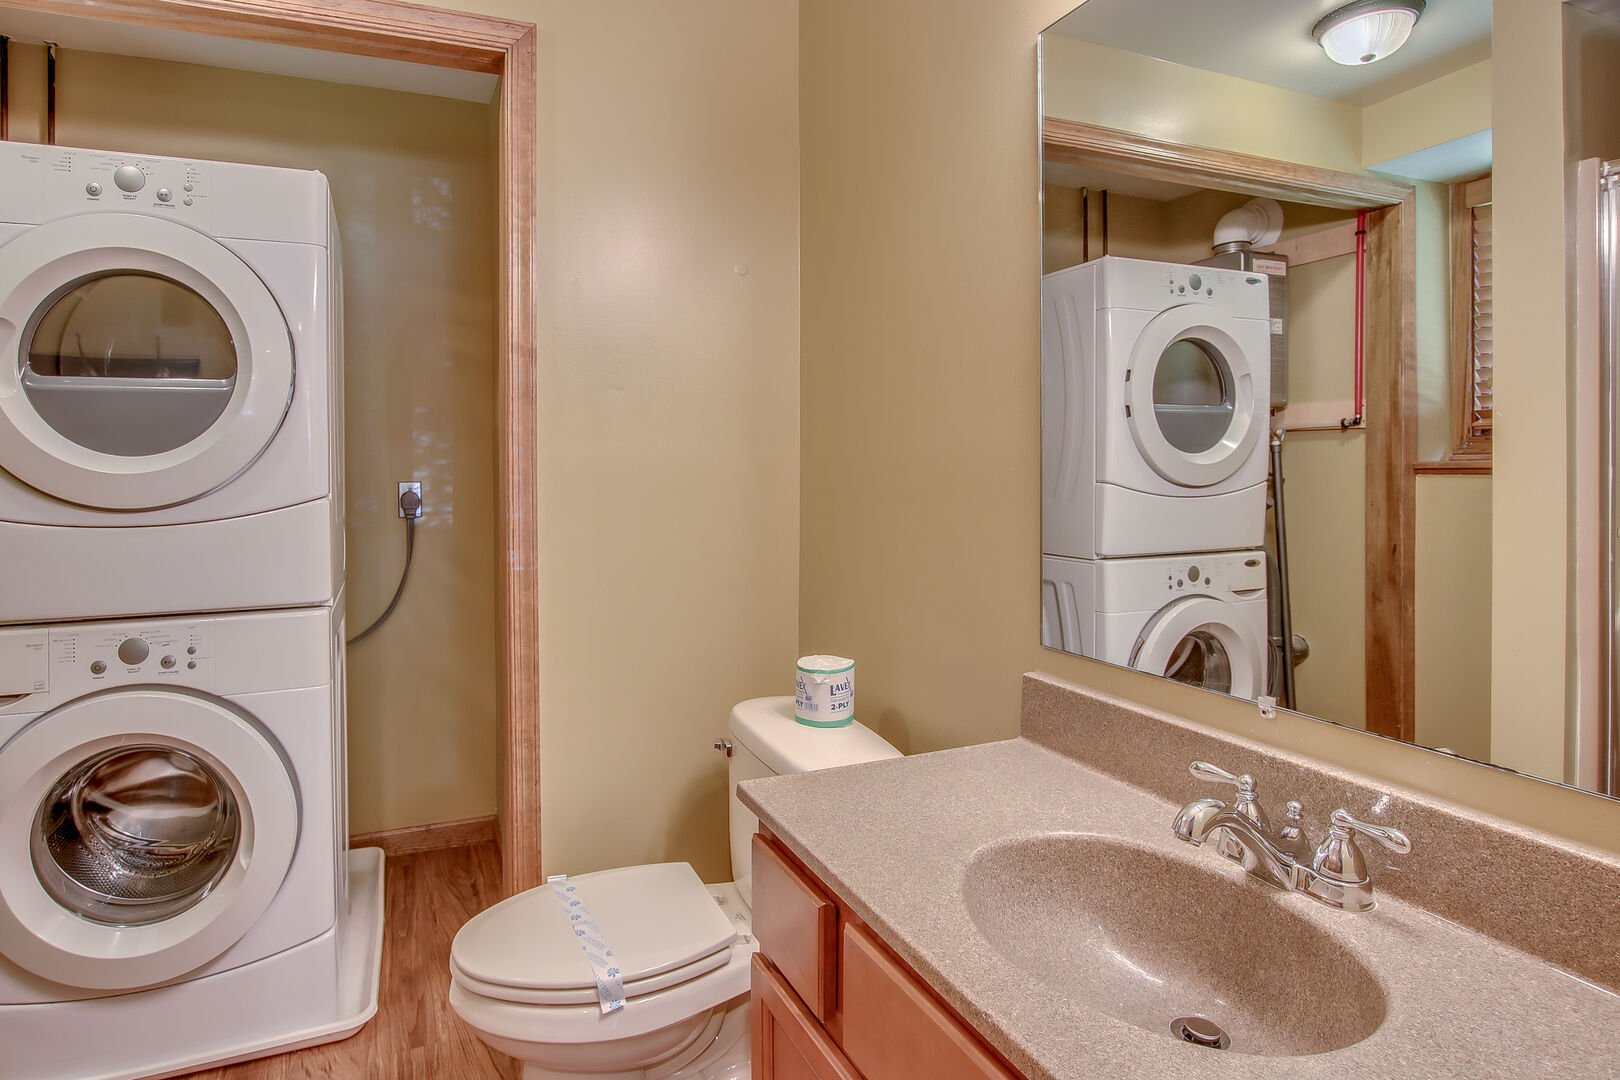 Bathroom with a sink and mirror, toilet, washer and dryer.